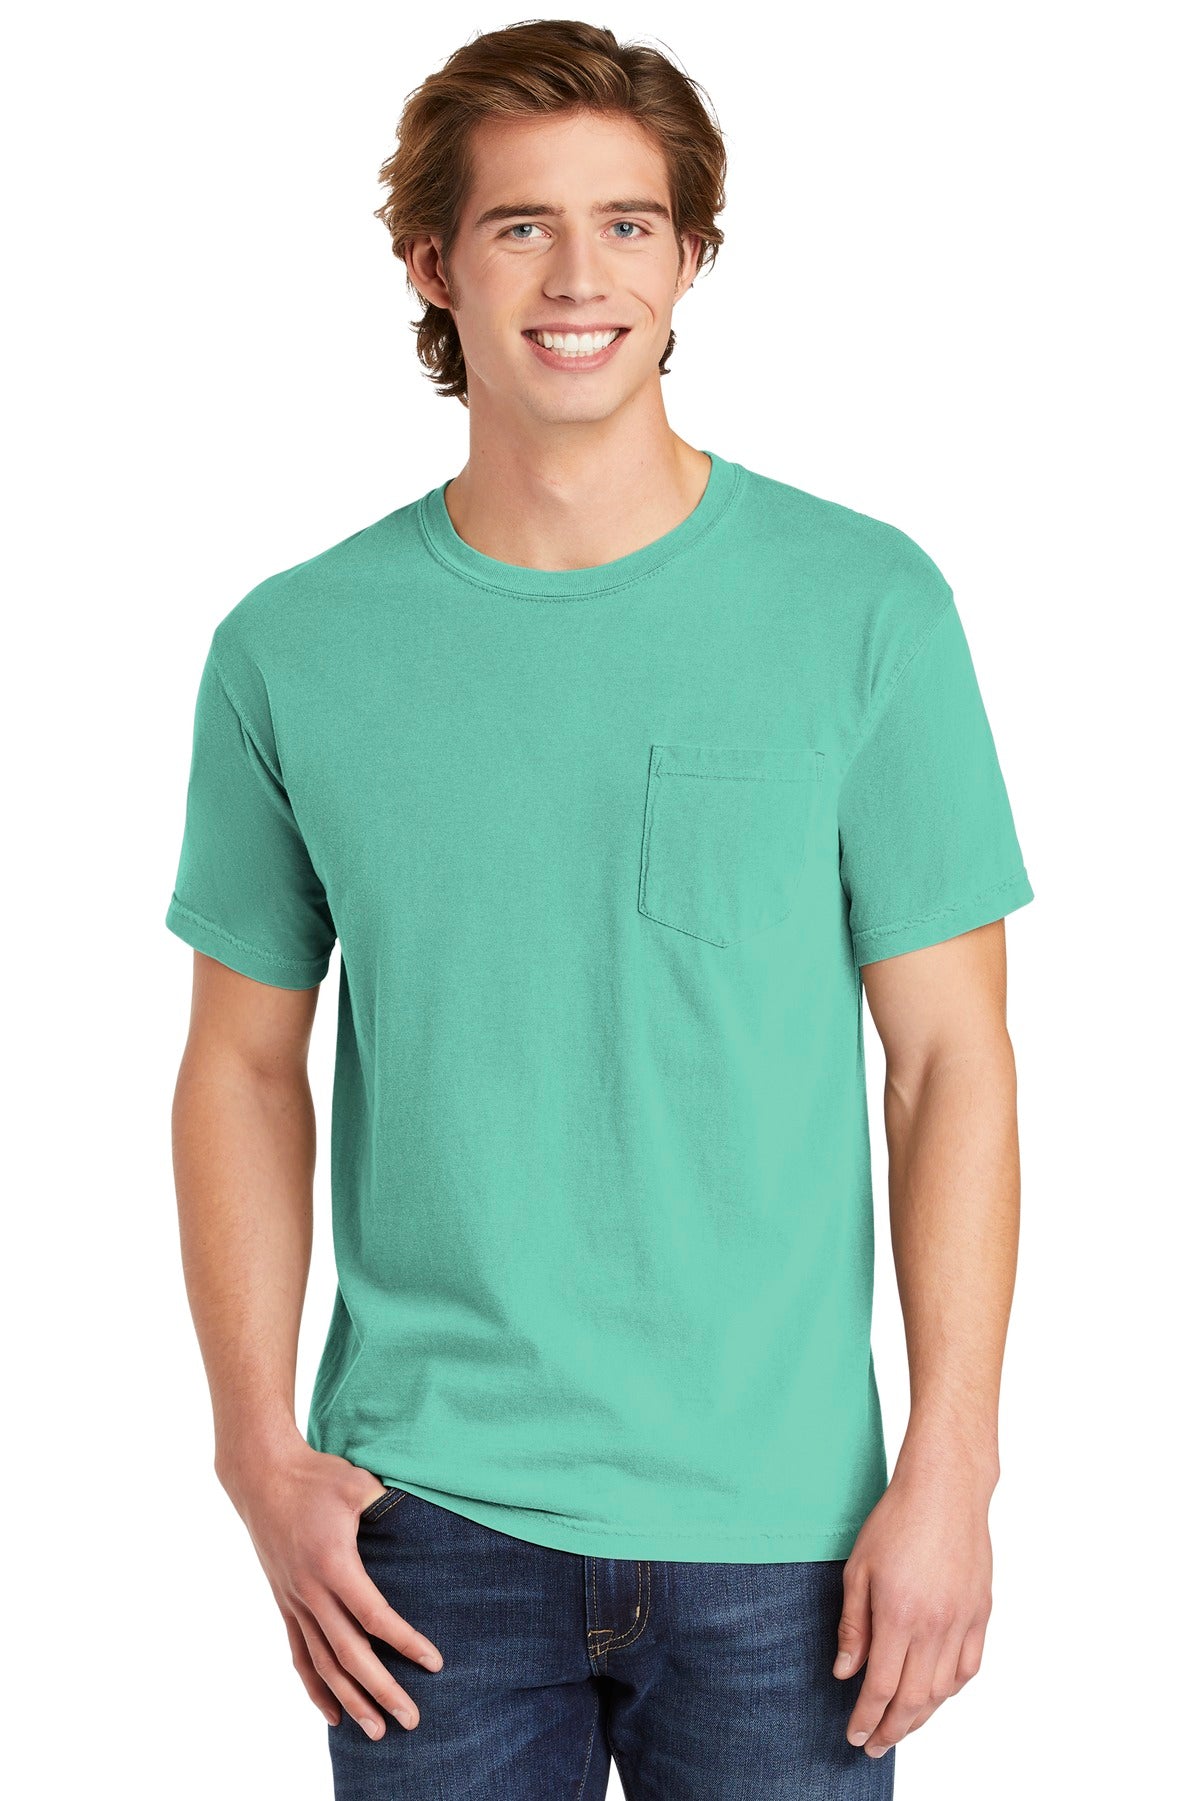 T-Shirts Chalky Mint Comfort Colors